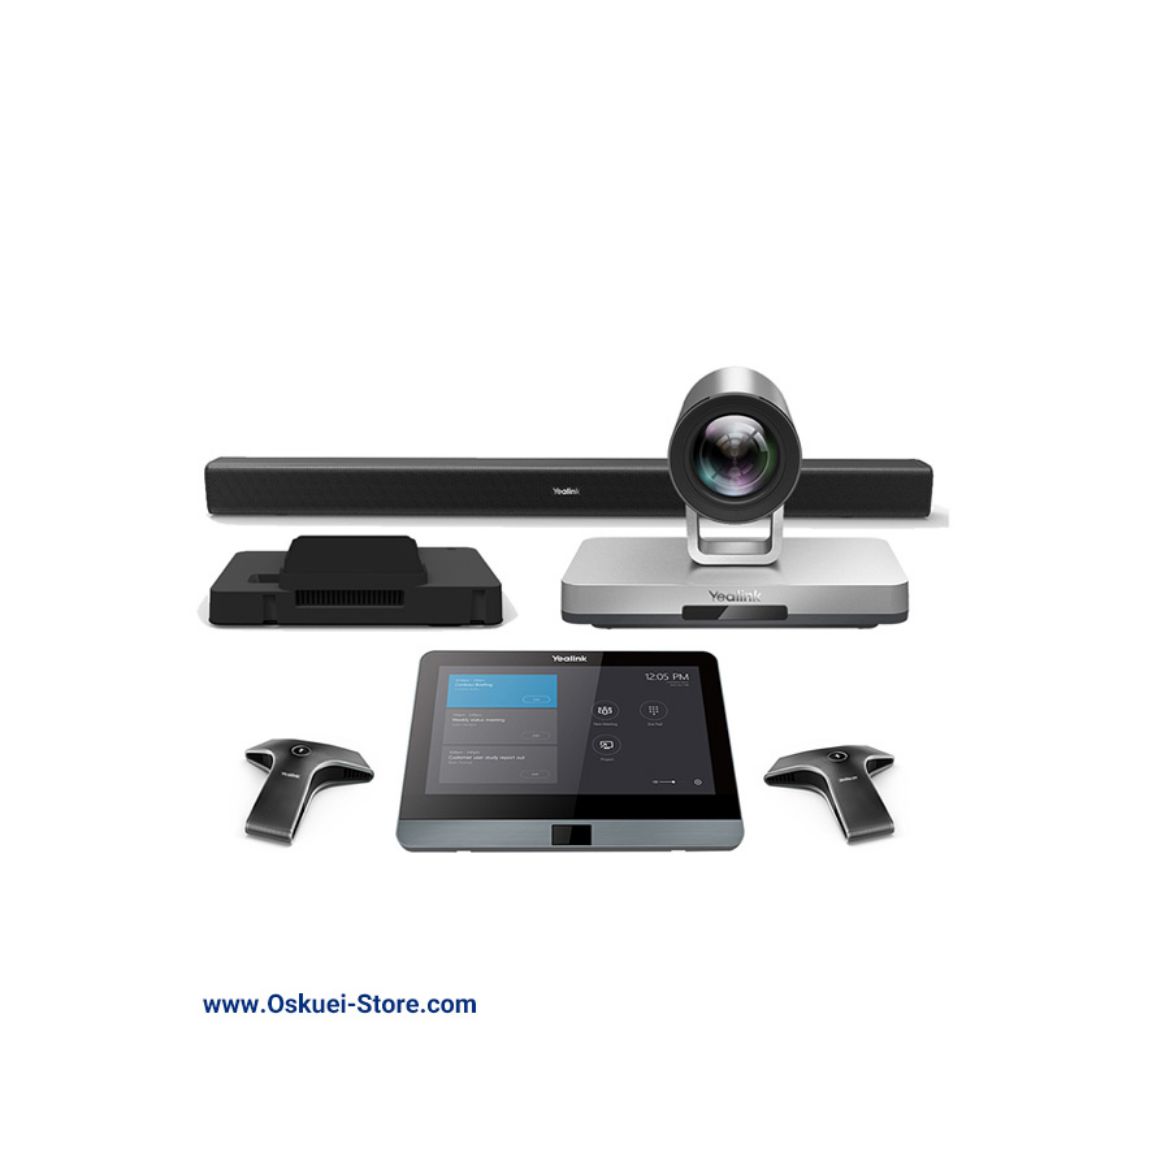 Yealink MVC800 video conferencing system